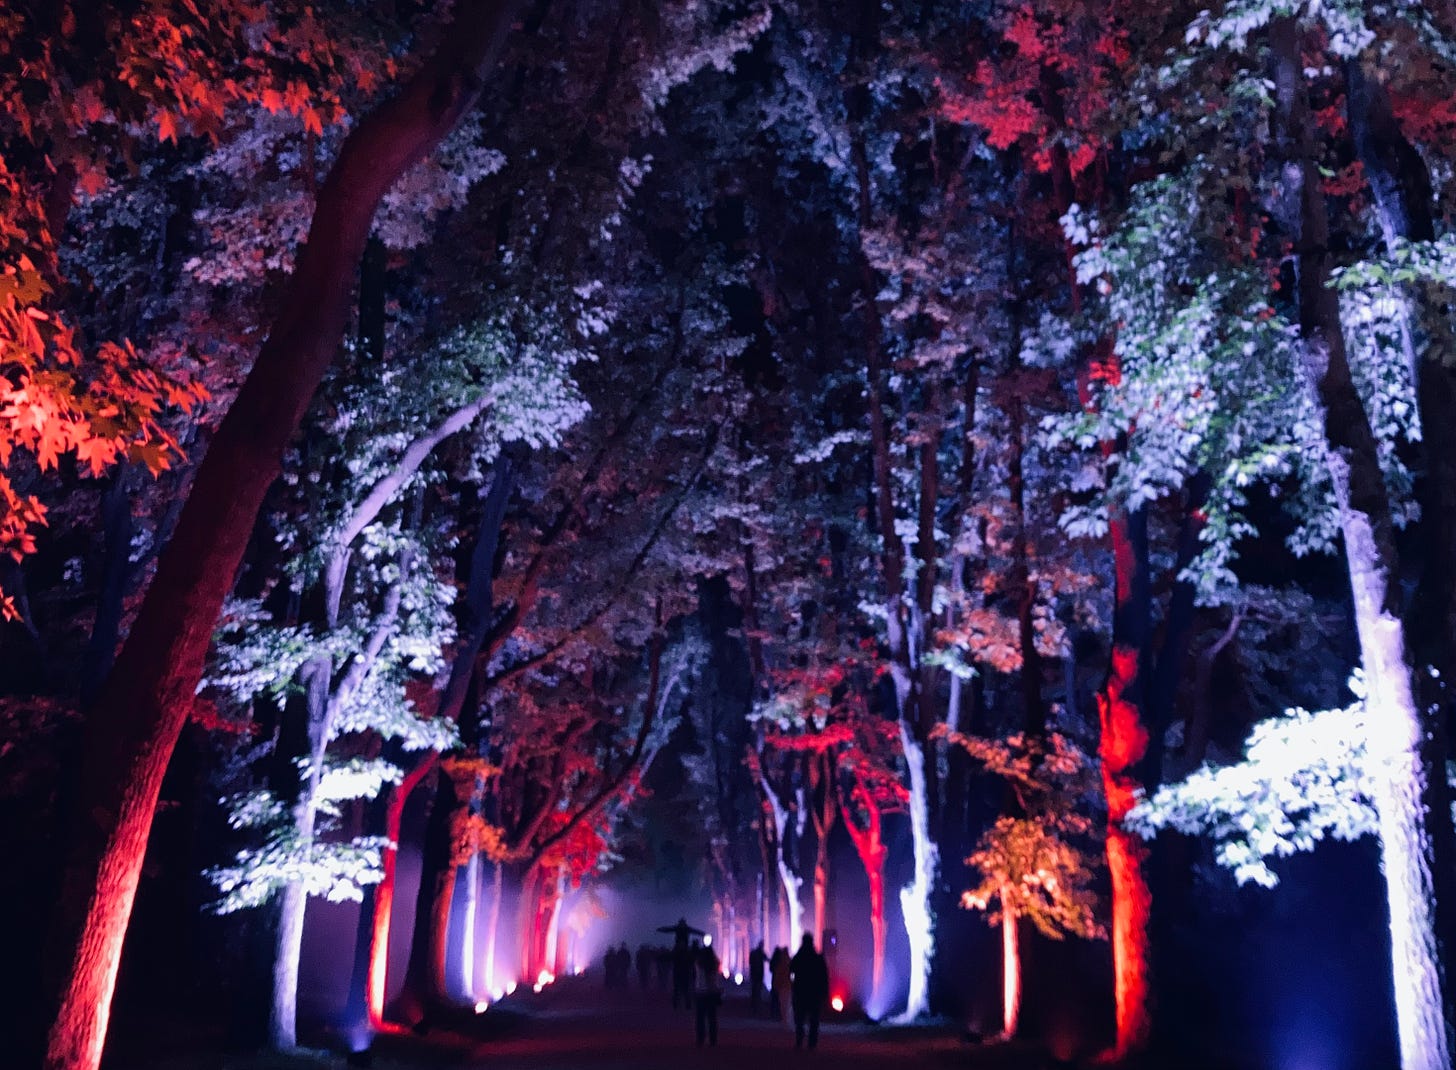 Forest illuminated at night by colored lights coming from the ground next to each tree.